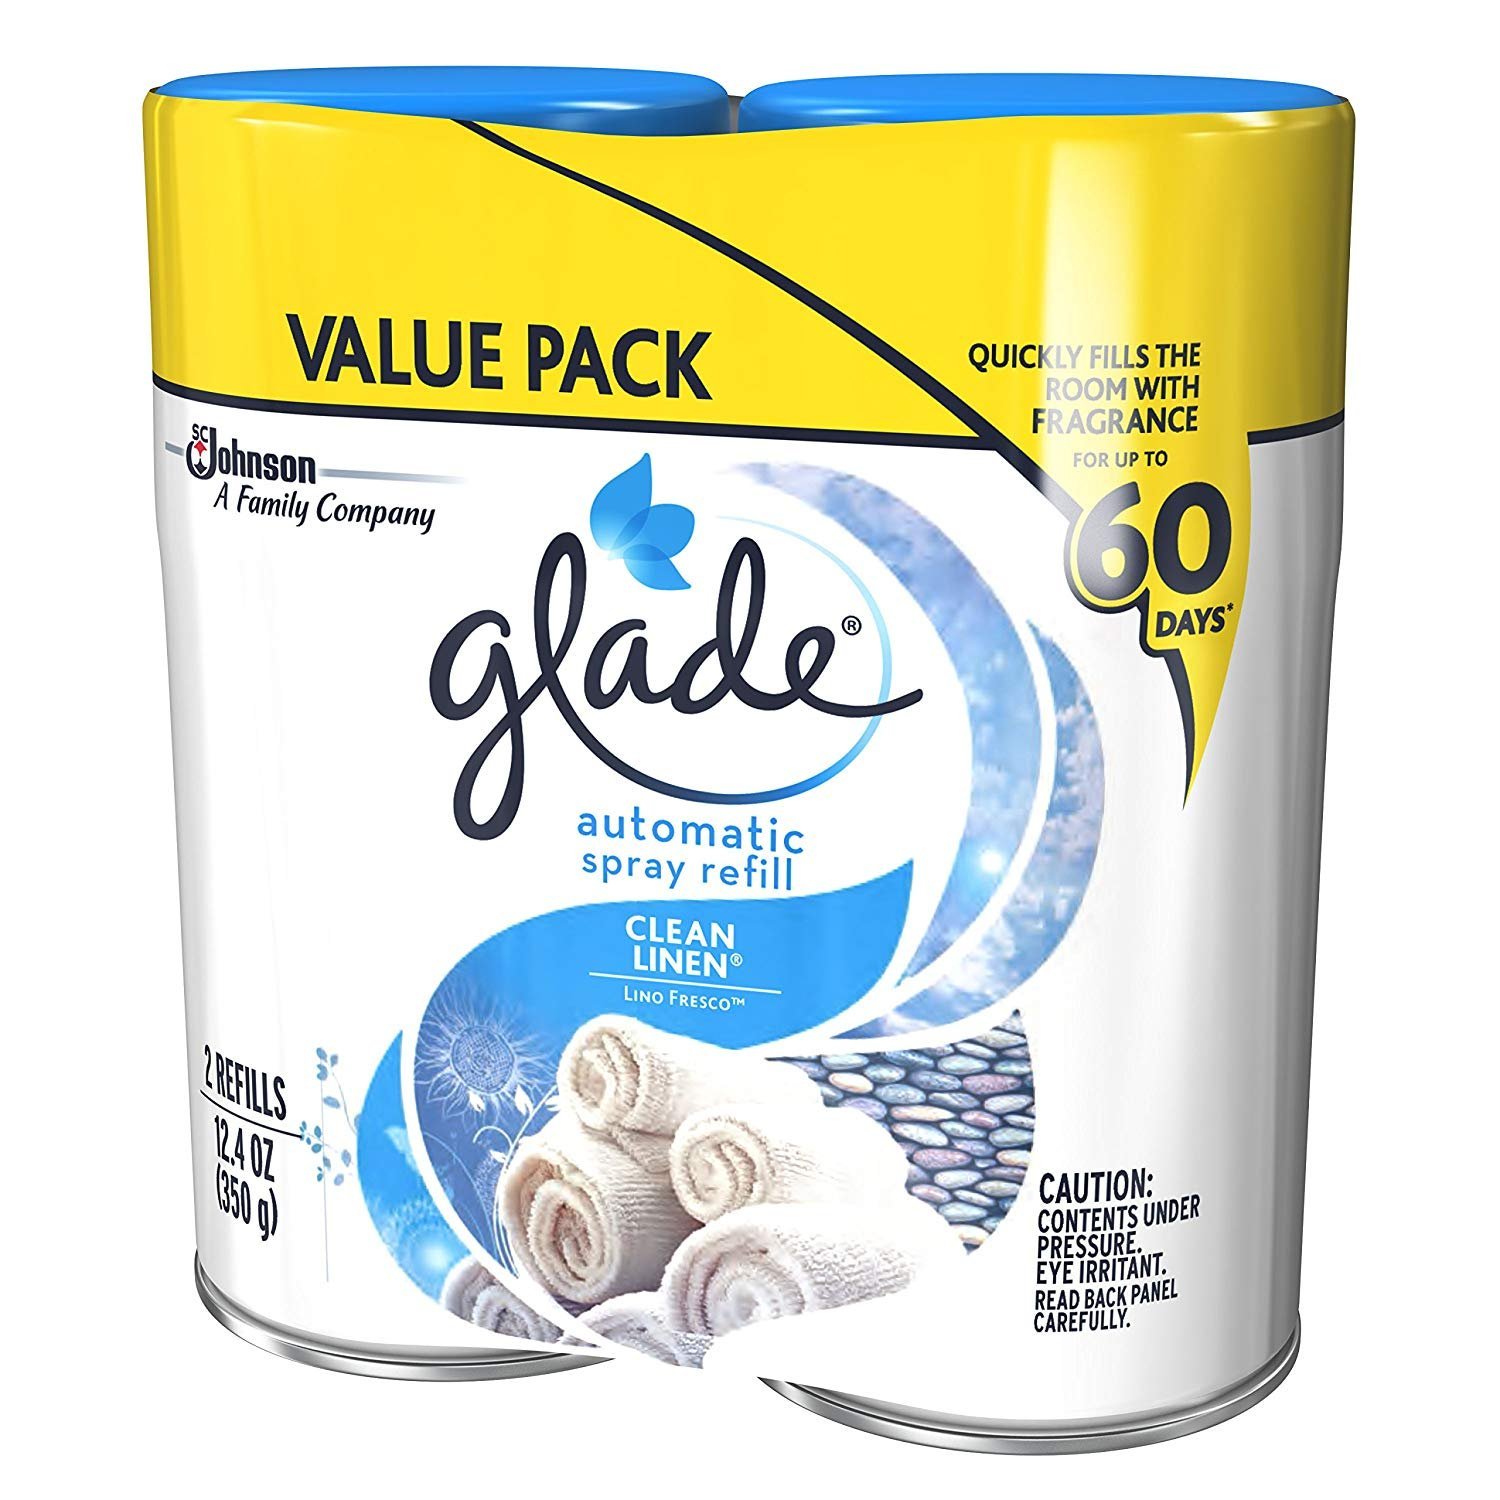 Glade Automatic Spray Air Freshener, Clean Linen Scent, 6.2 Ounce (Pack of 6)